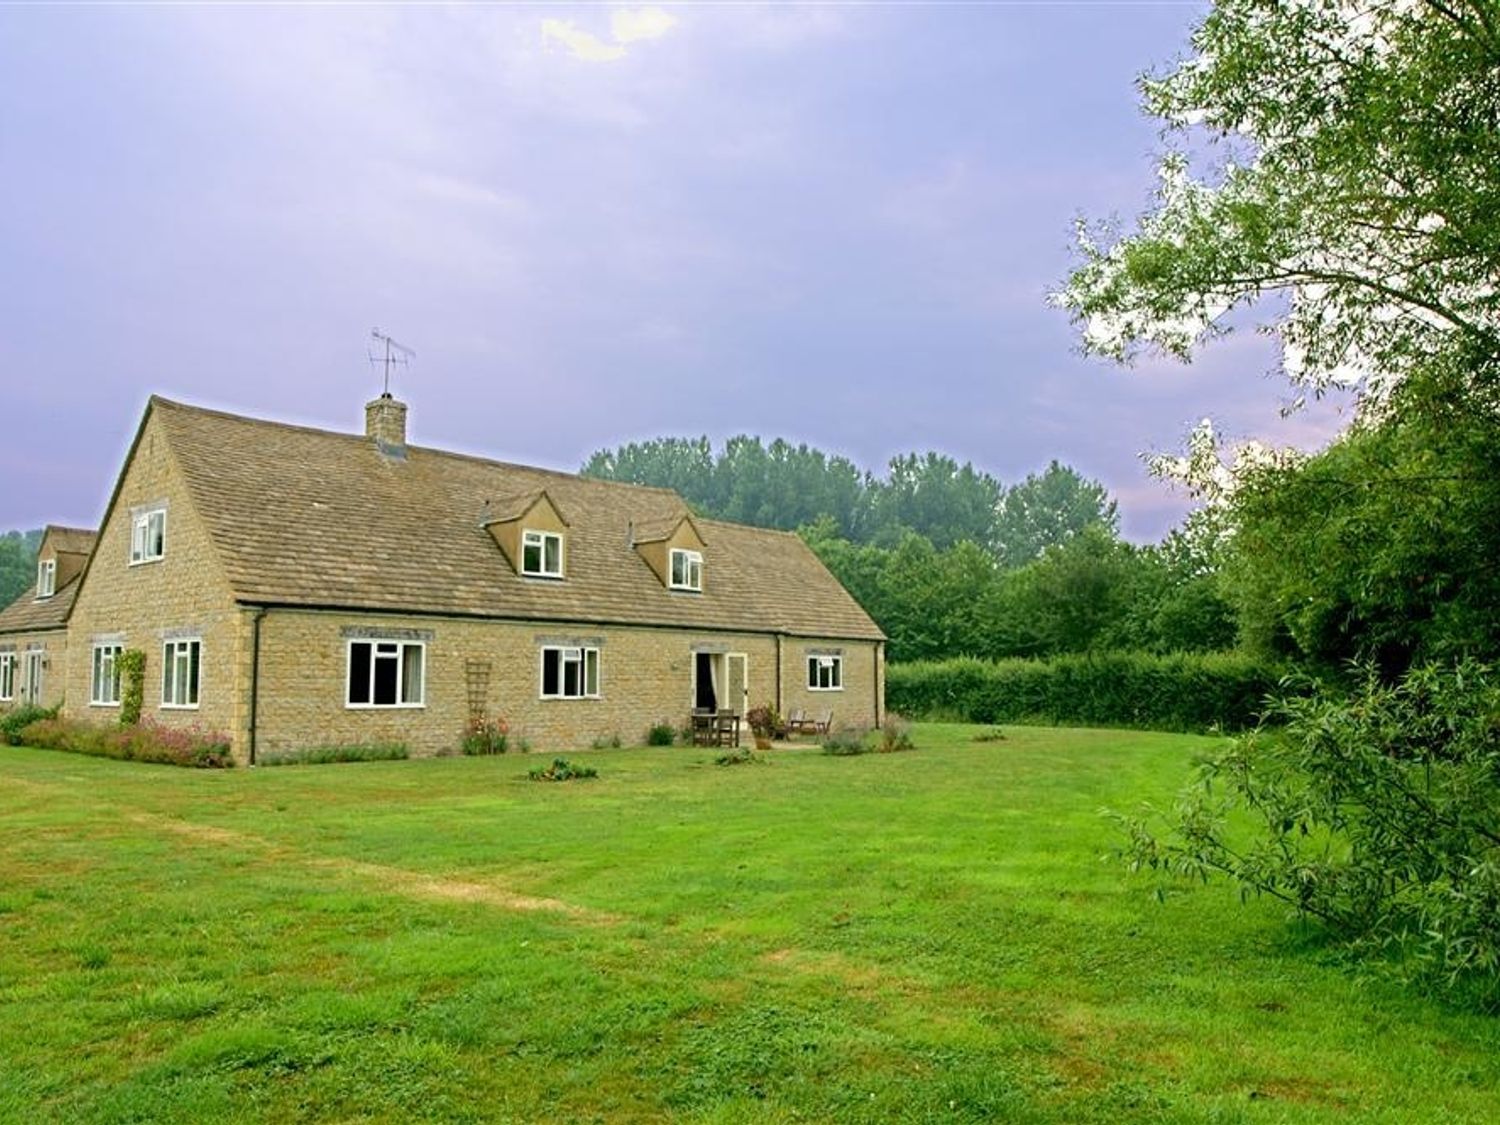 Tagmoor Hollow - Cotswolds - 988661 - photo 1